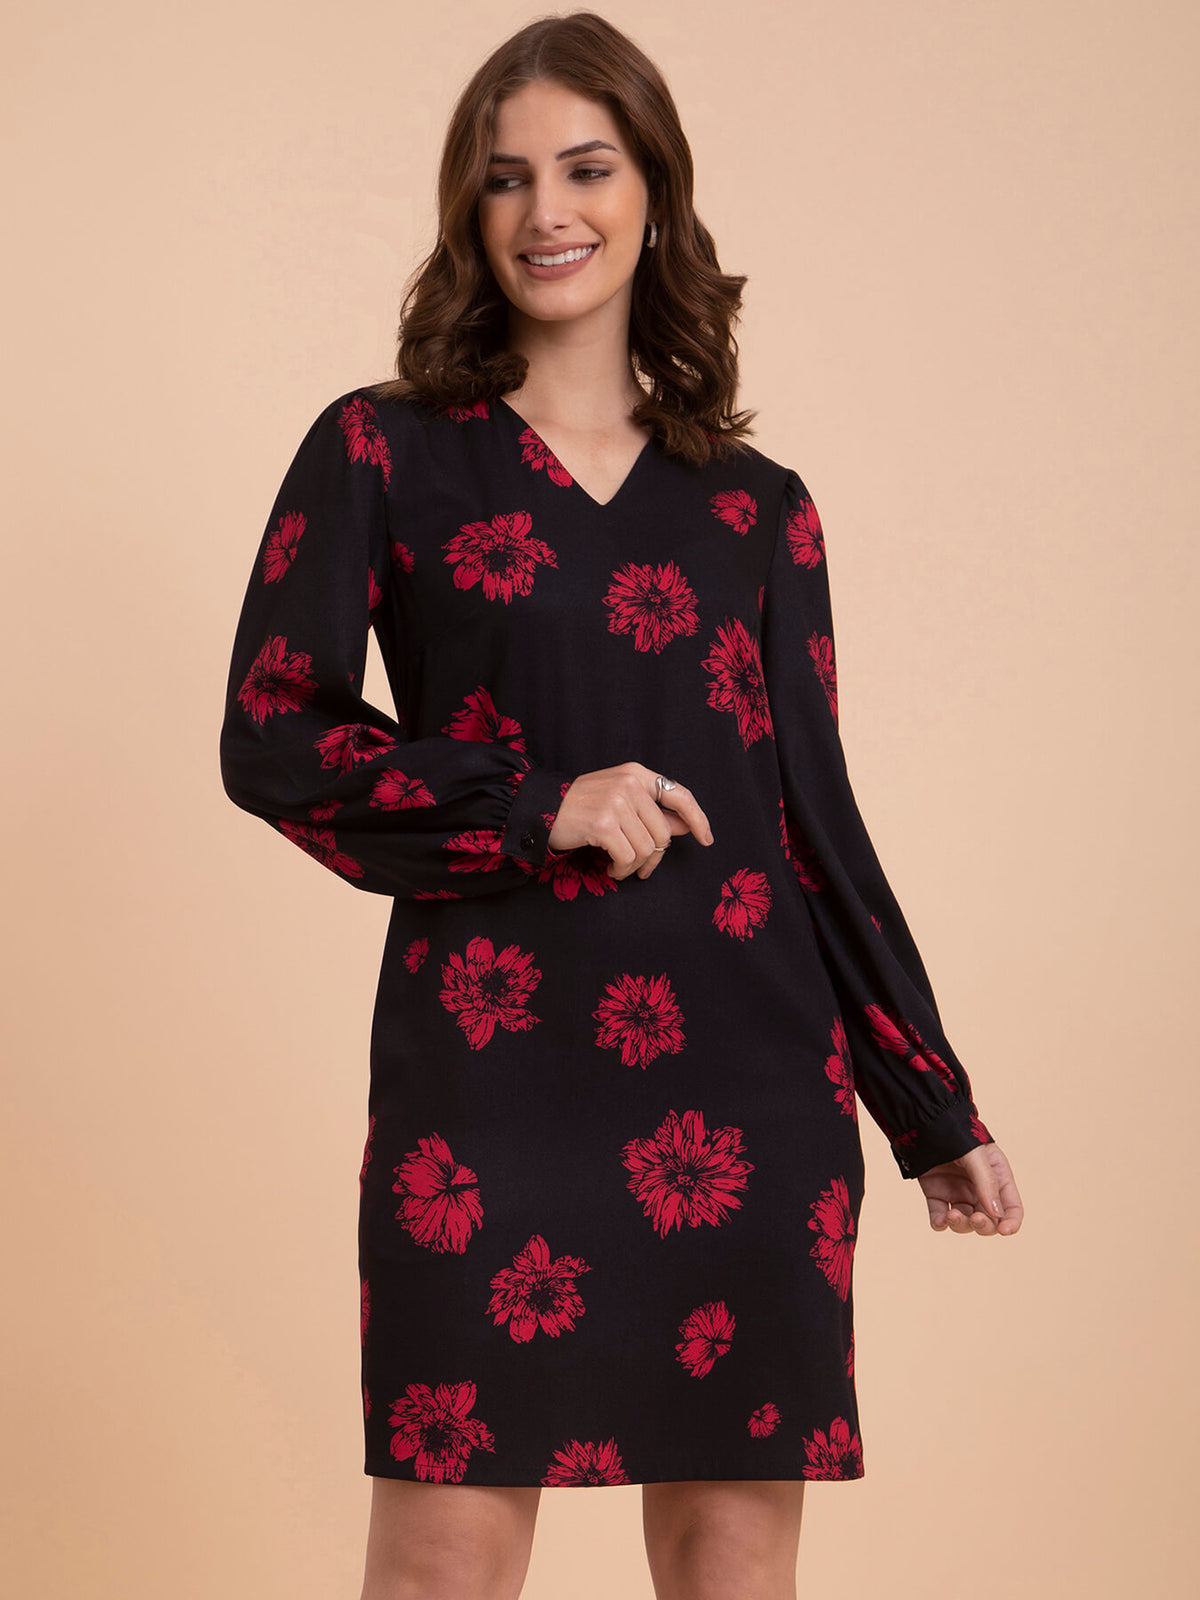 Floral Print Shift Dress - Black And Red